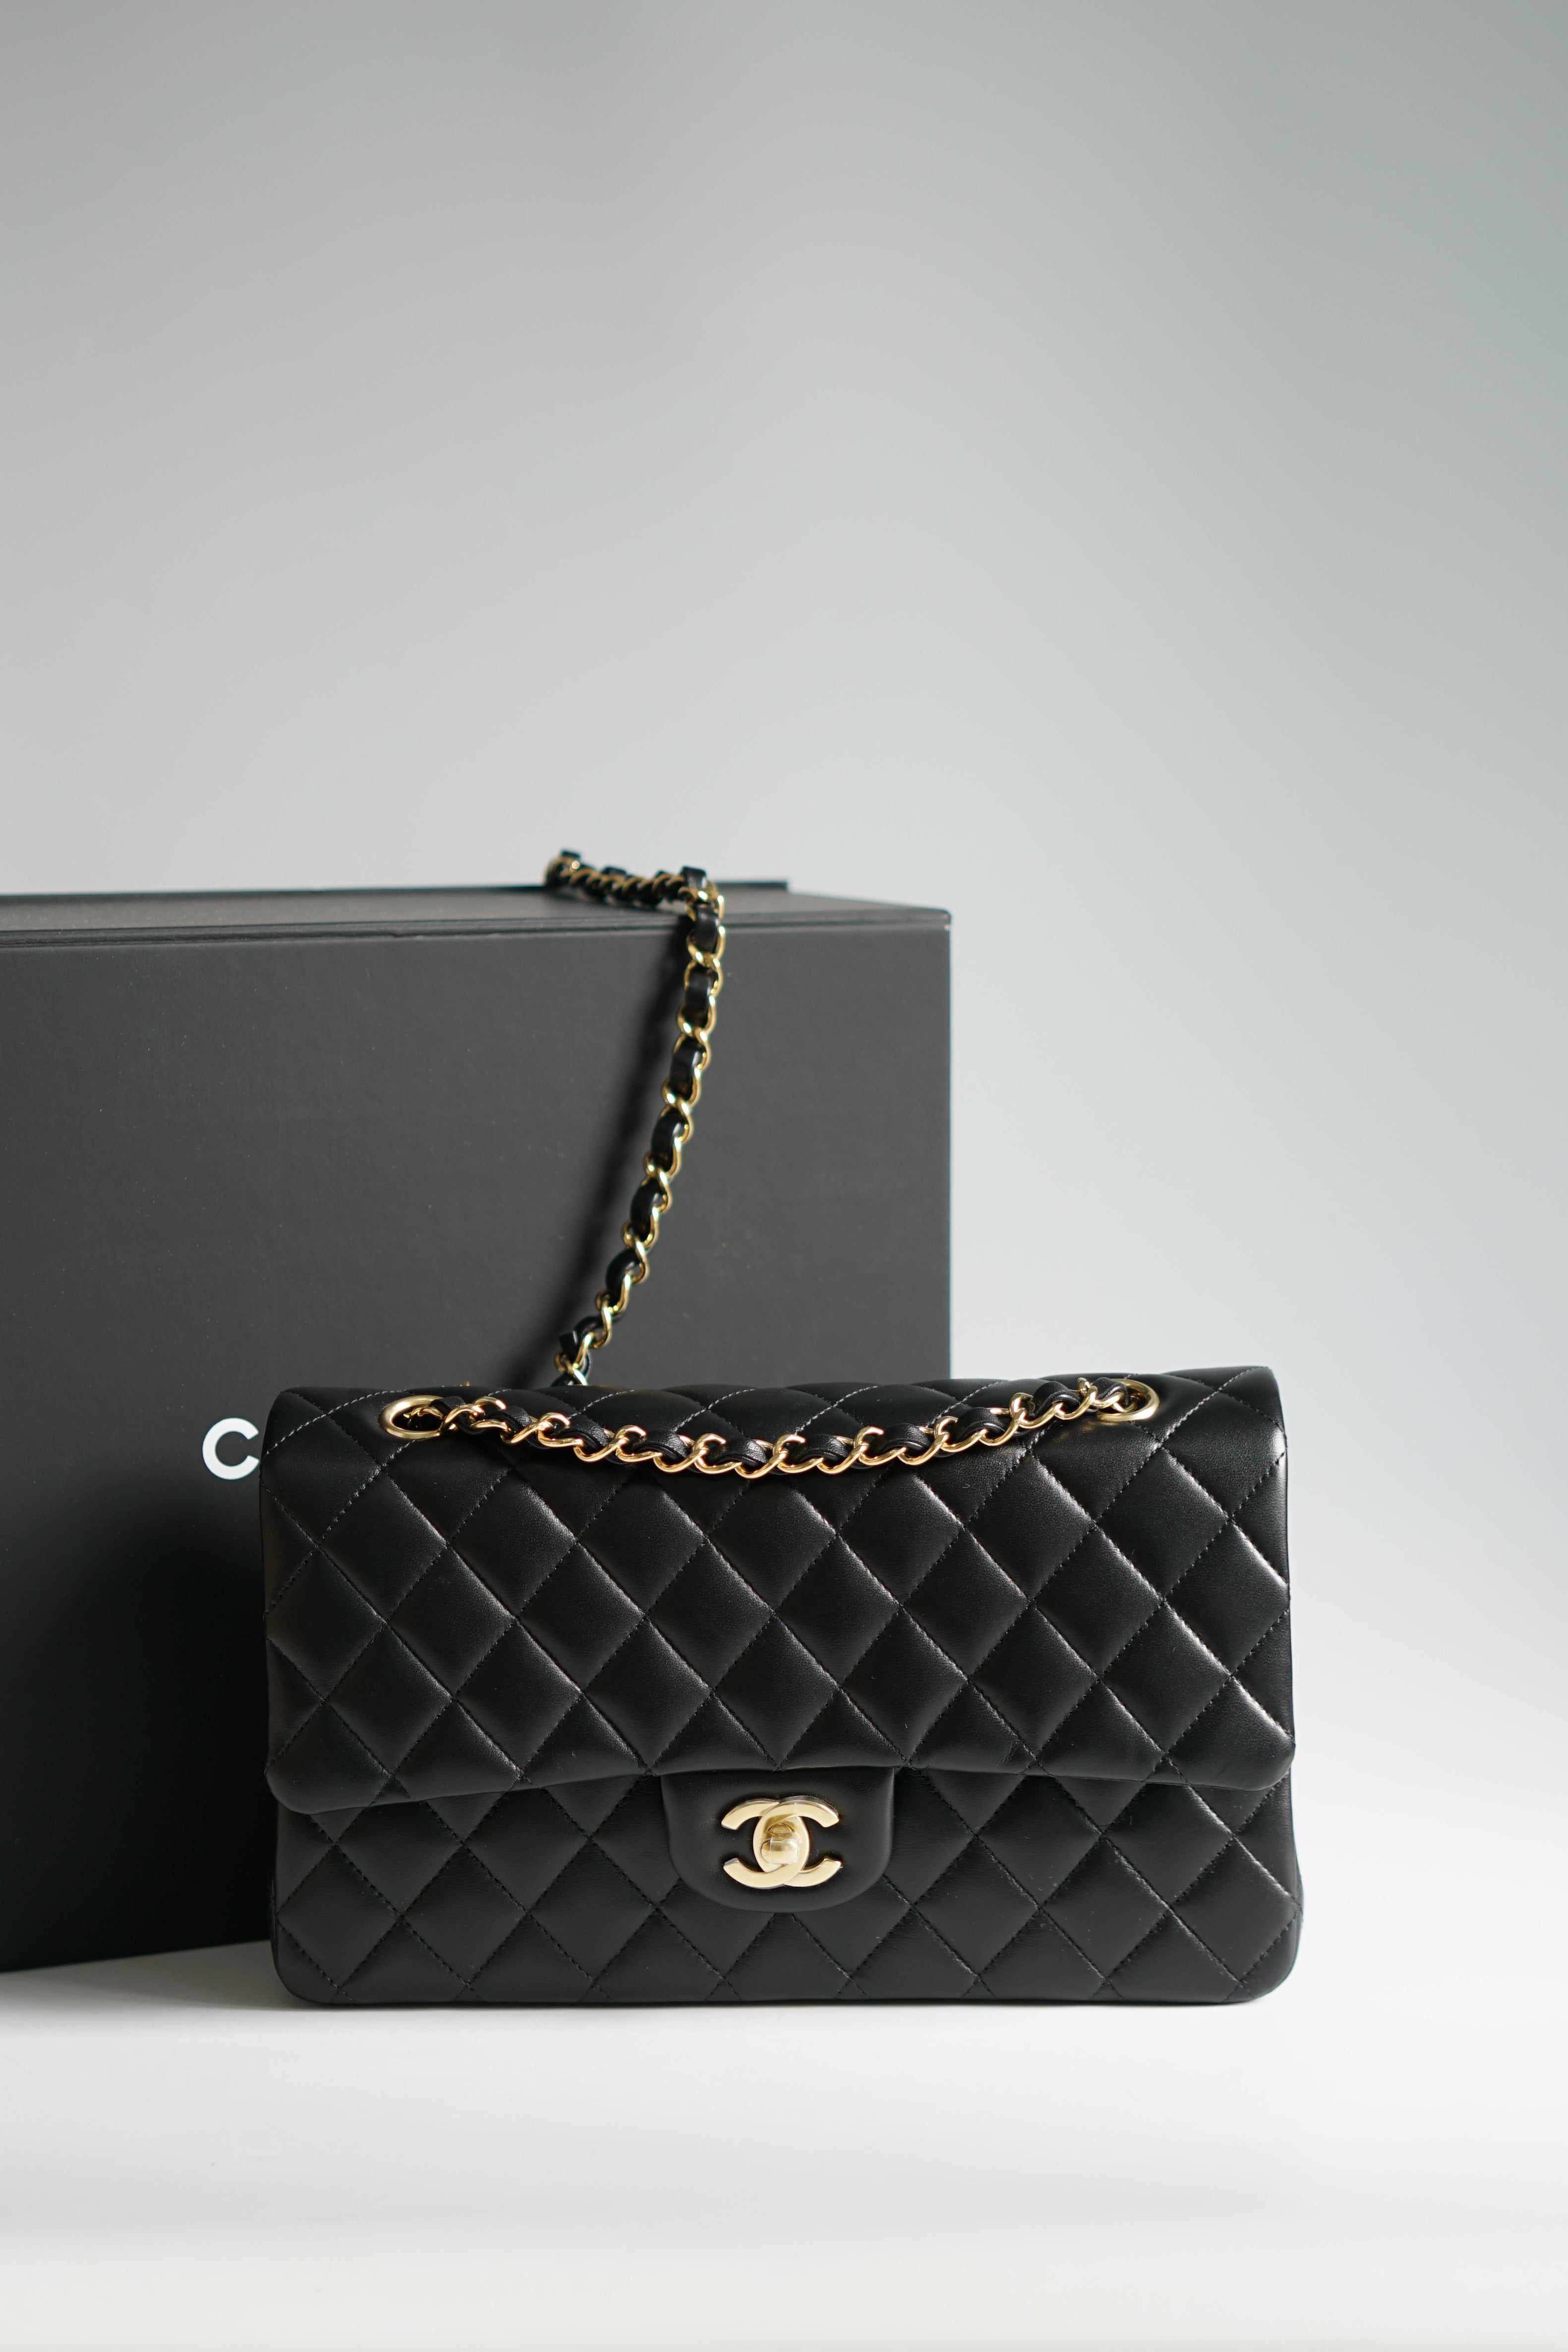 Chanel Mini 22 Black Calfskin Leather and Gold Hardware